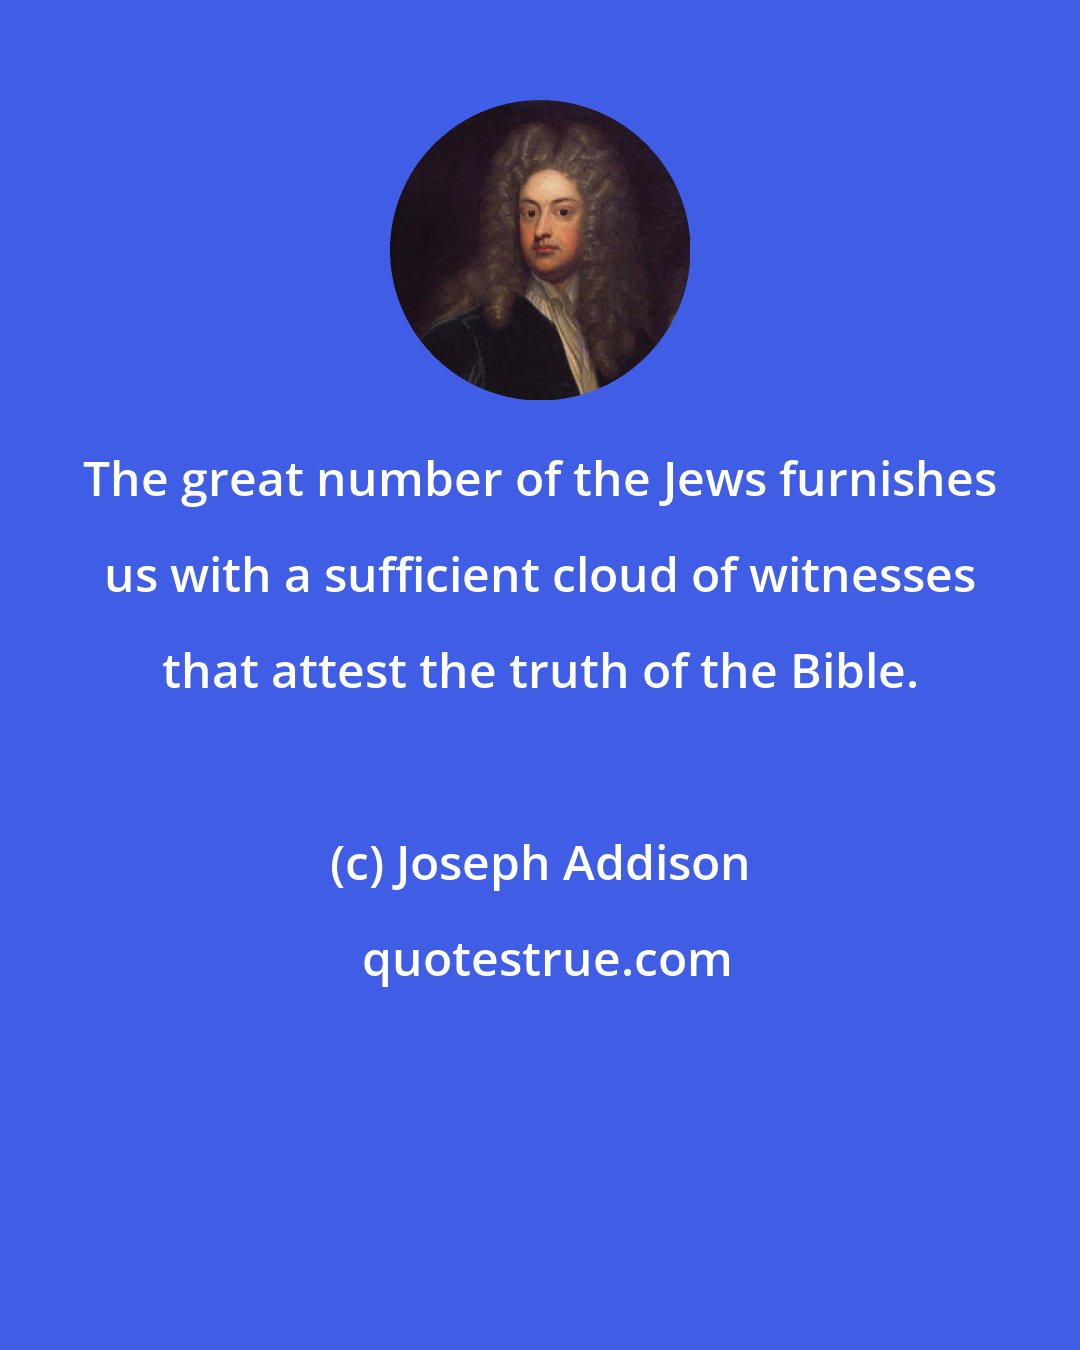 Joseph Addison: The great number of the Jews furnishes us with a sufficient cloud of witnesses that attest the truth of the Bible.